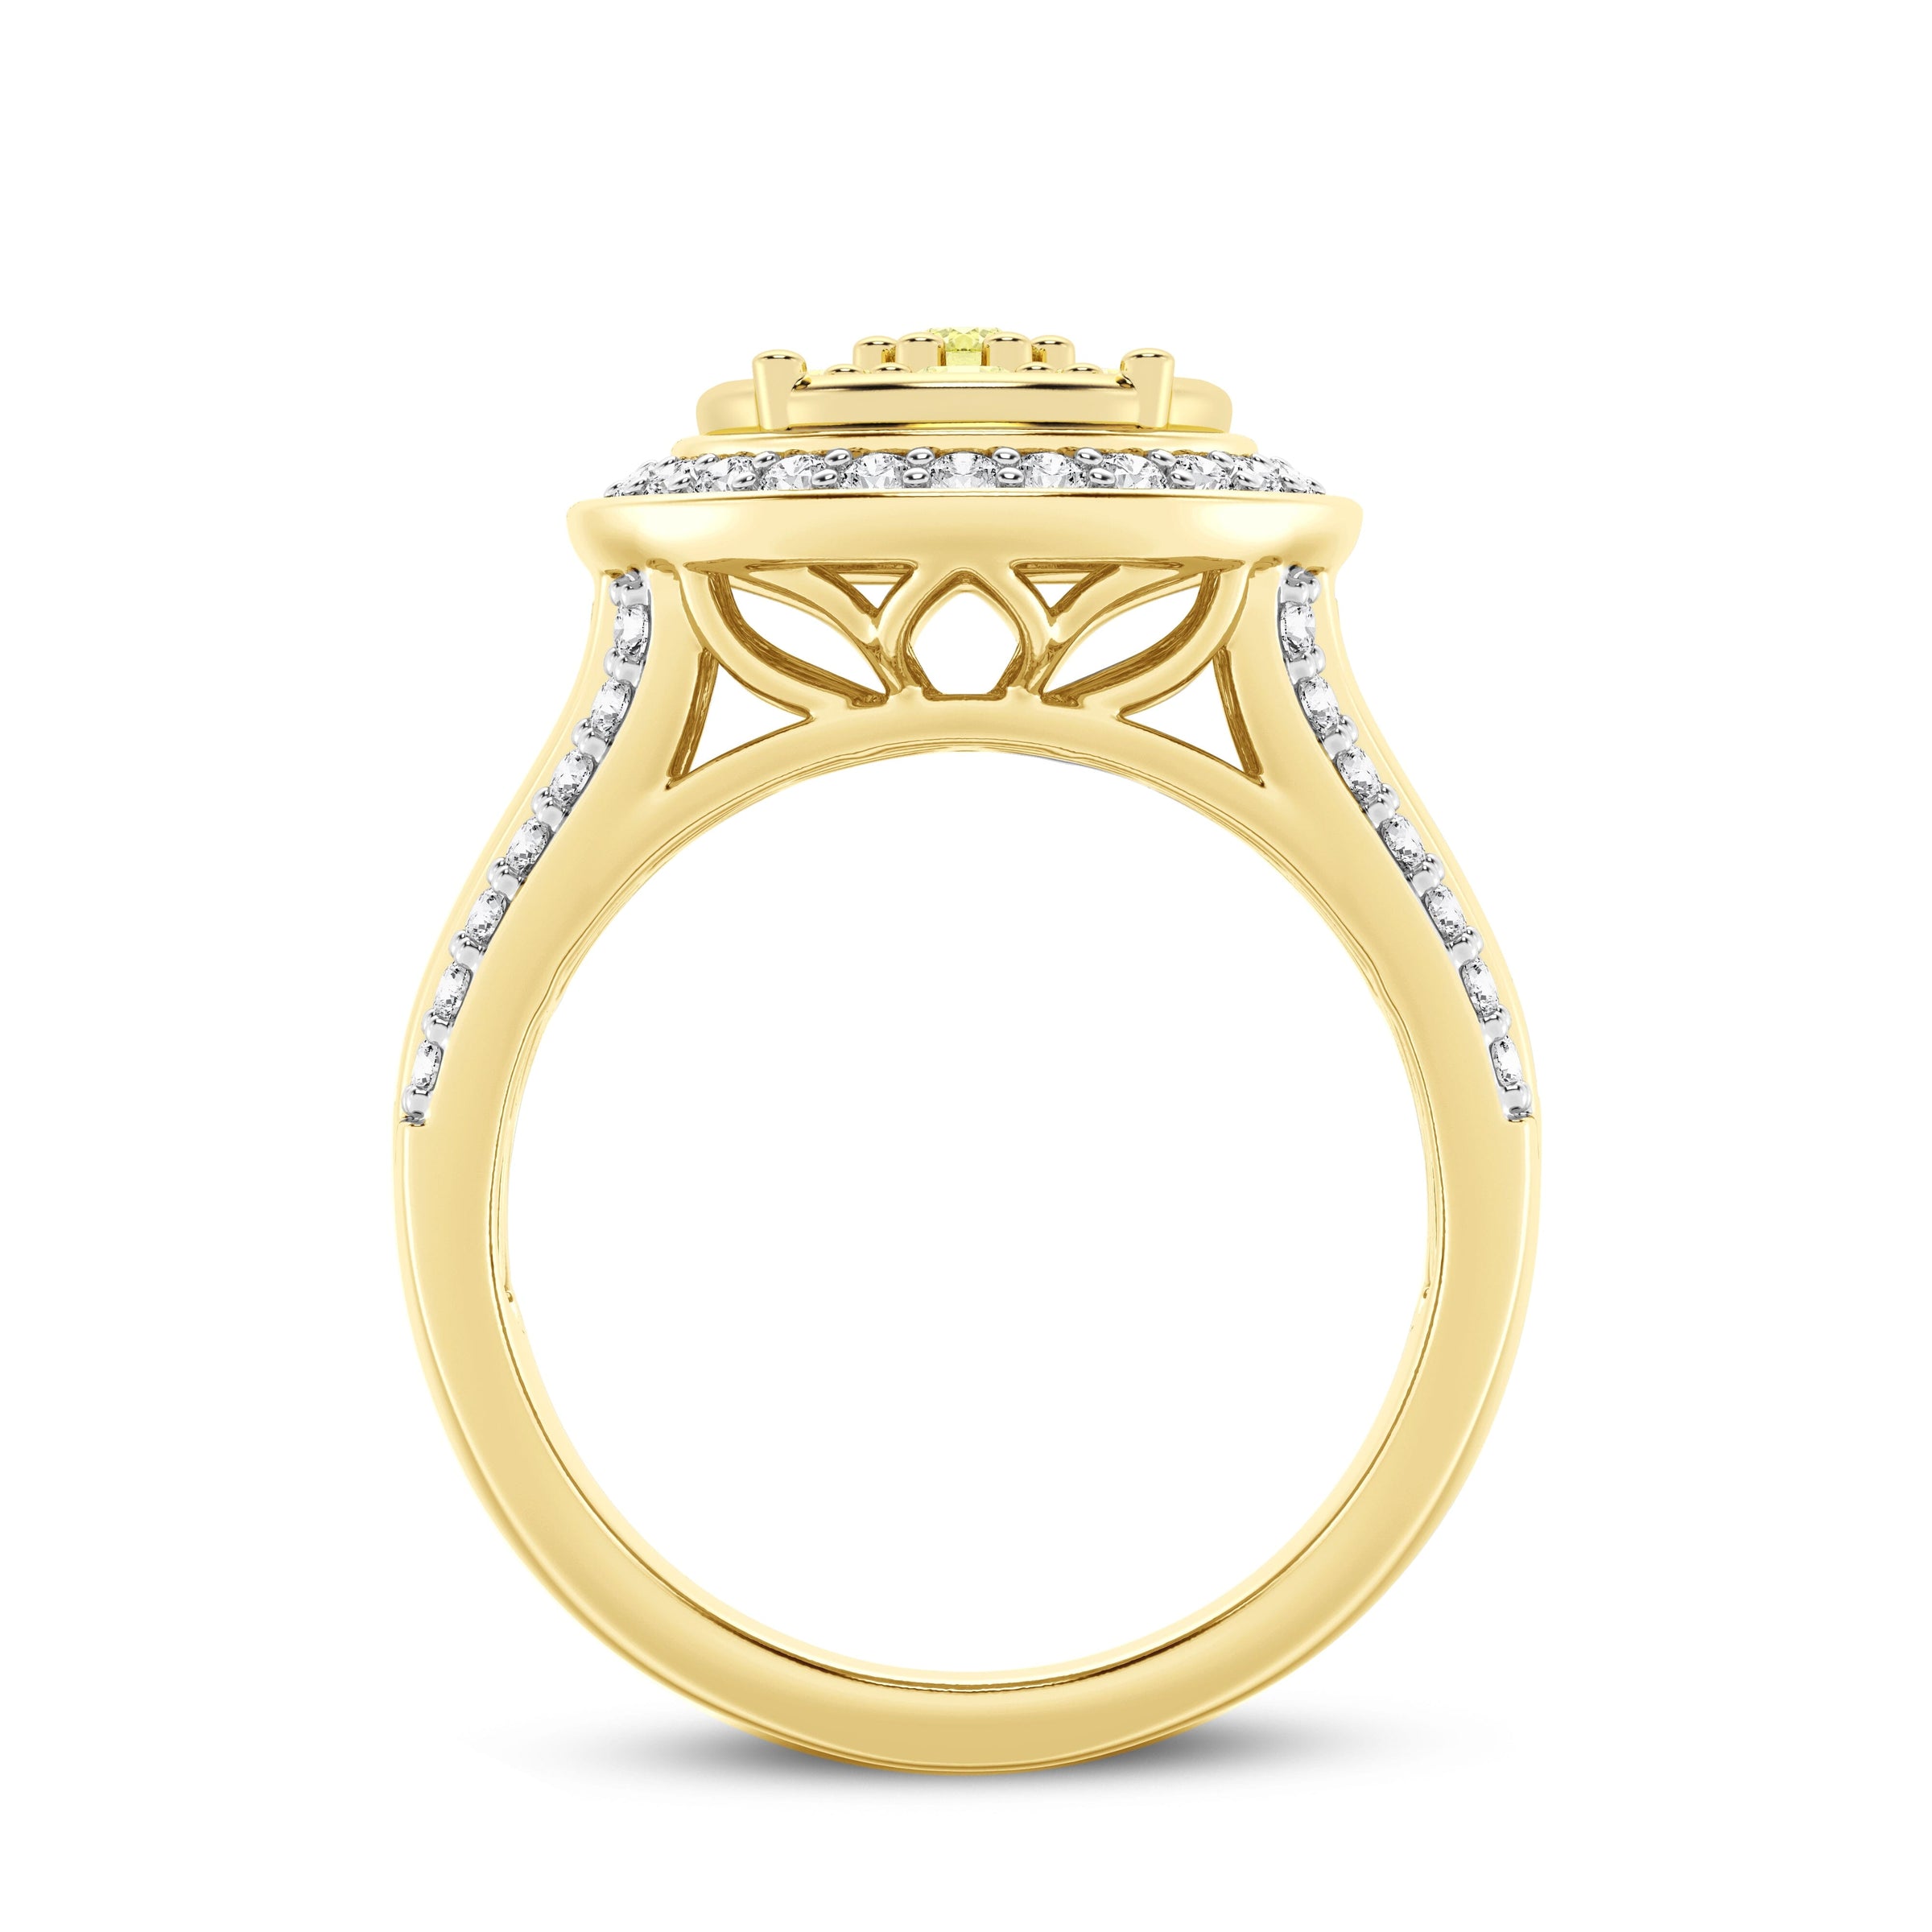 Meera Halo Bezel Set Ring with 1.00ct of Yellow Laboratory Grown Diamonds in 9ct Yellow Gold Rings Bevilles 